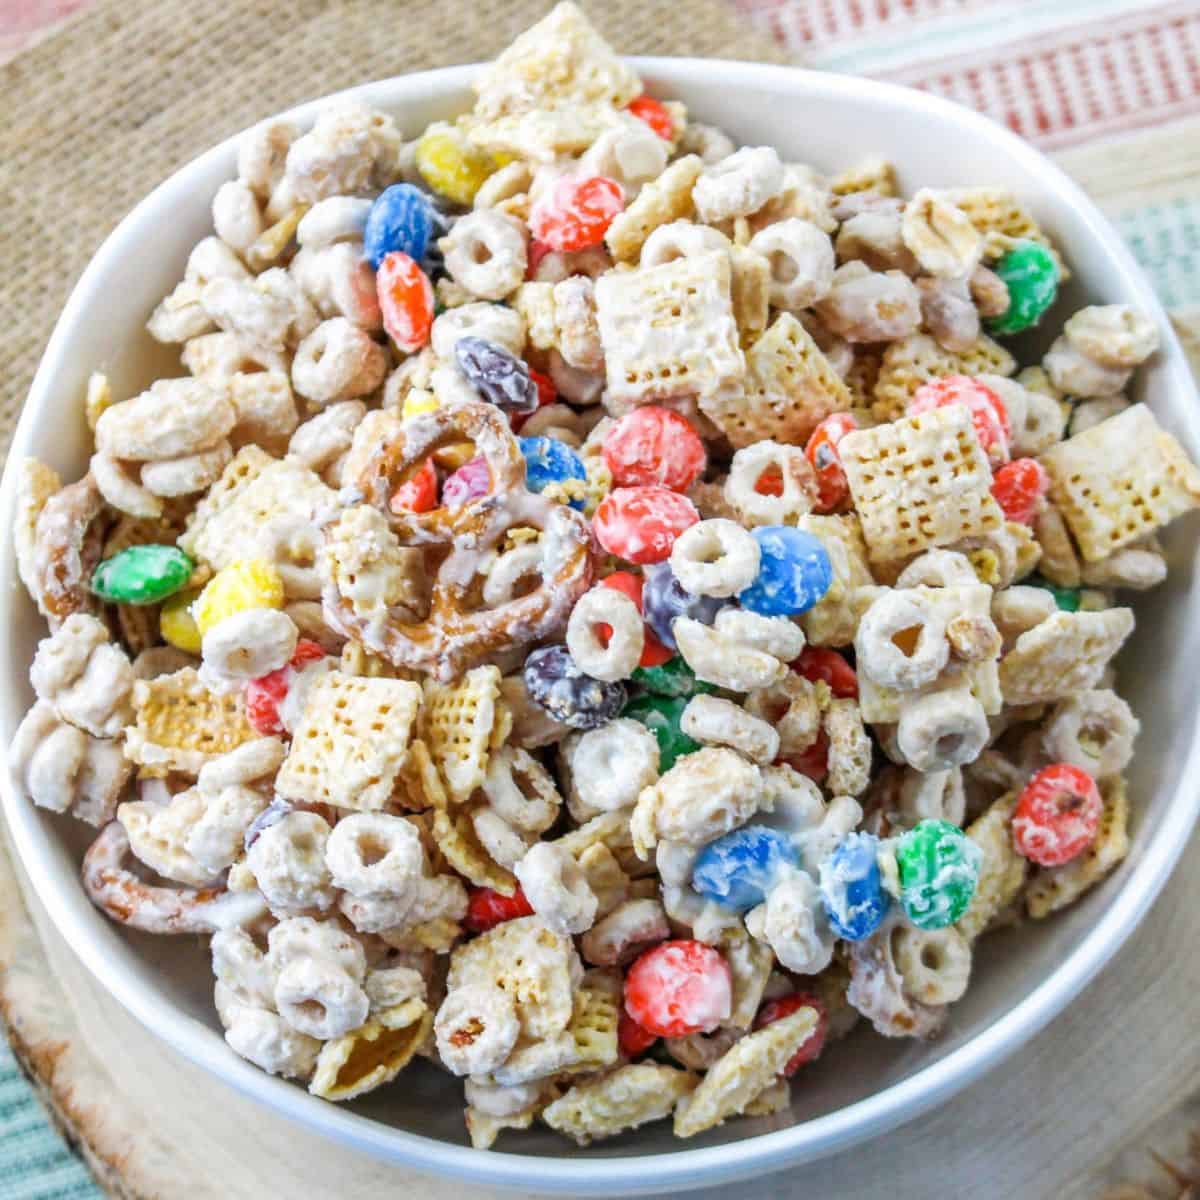 Easy White Chocolate Snack Mix, a simple and delicious sweet, salty, and crunchy recipe made with cereal, candy, pretzels, and nuts.